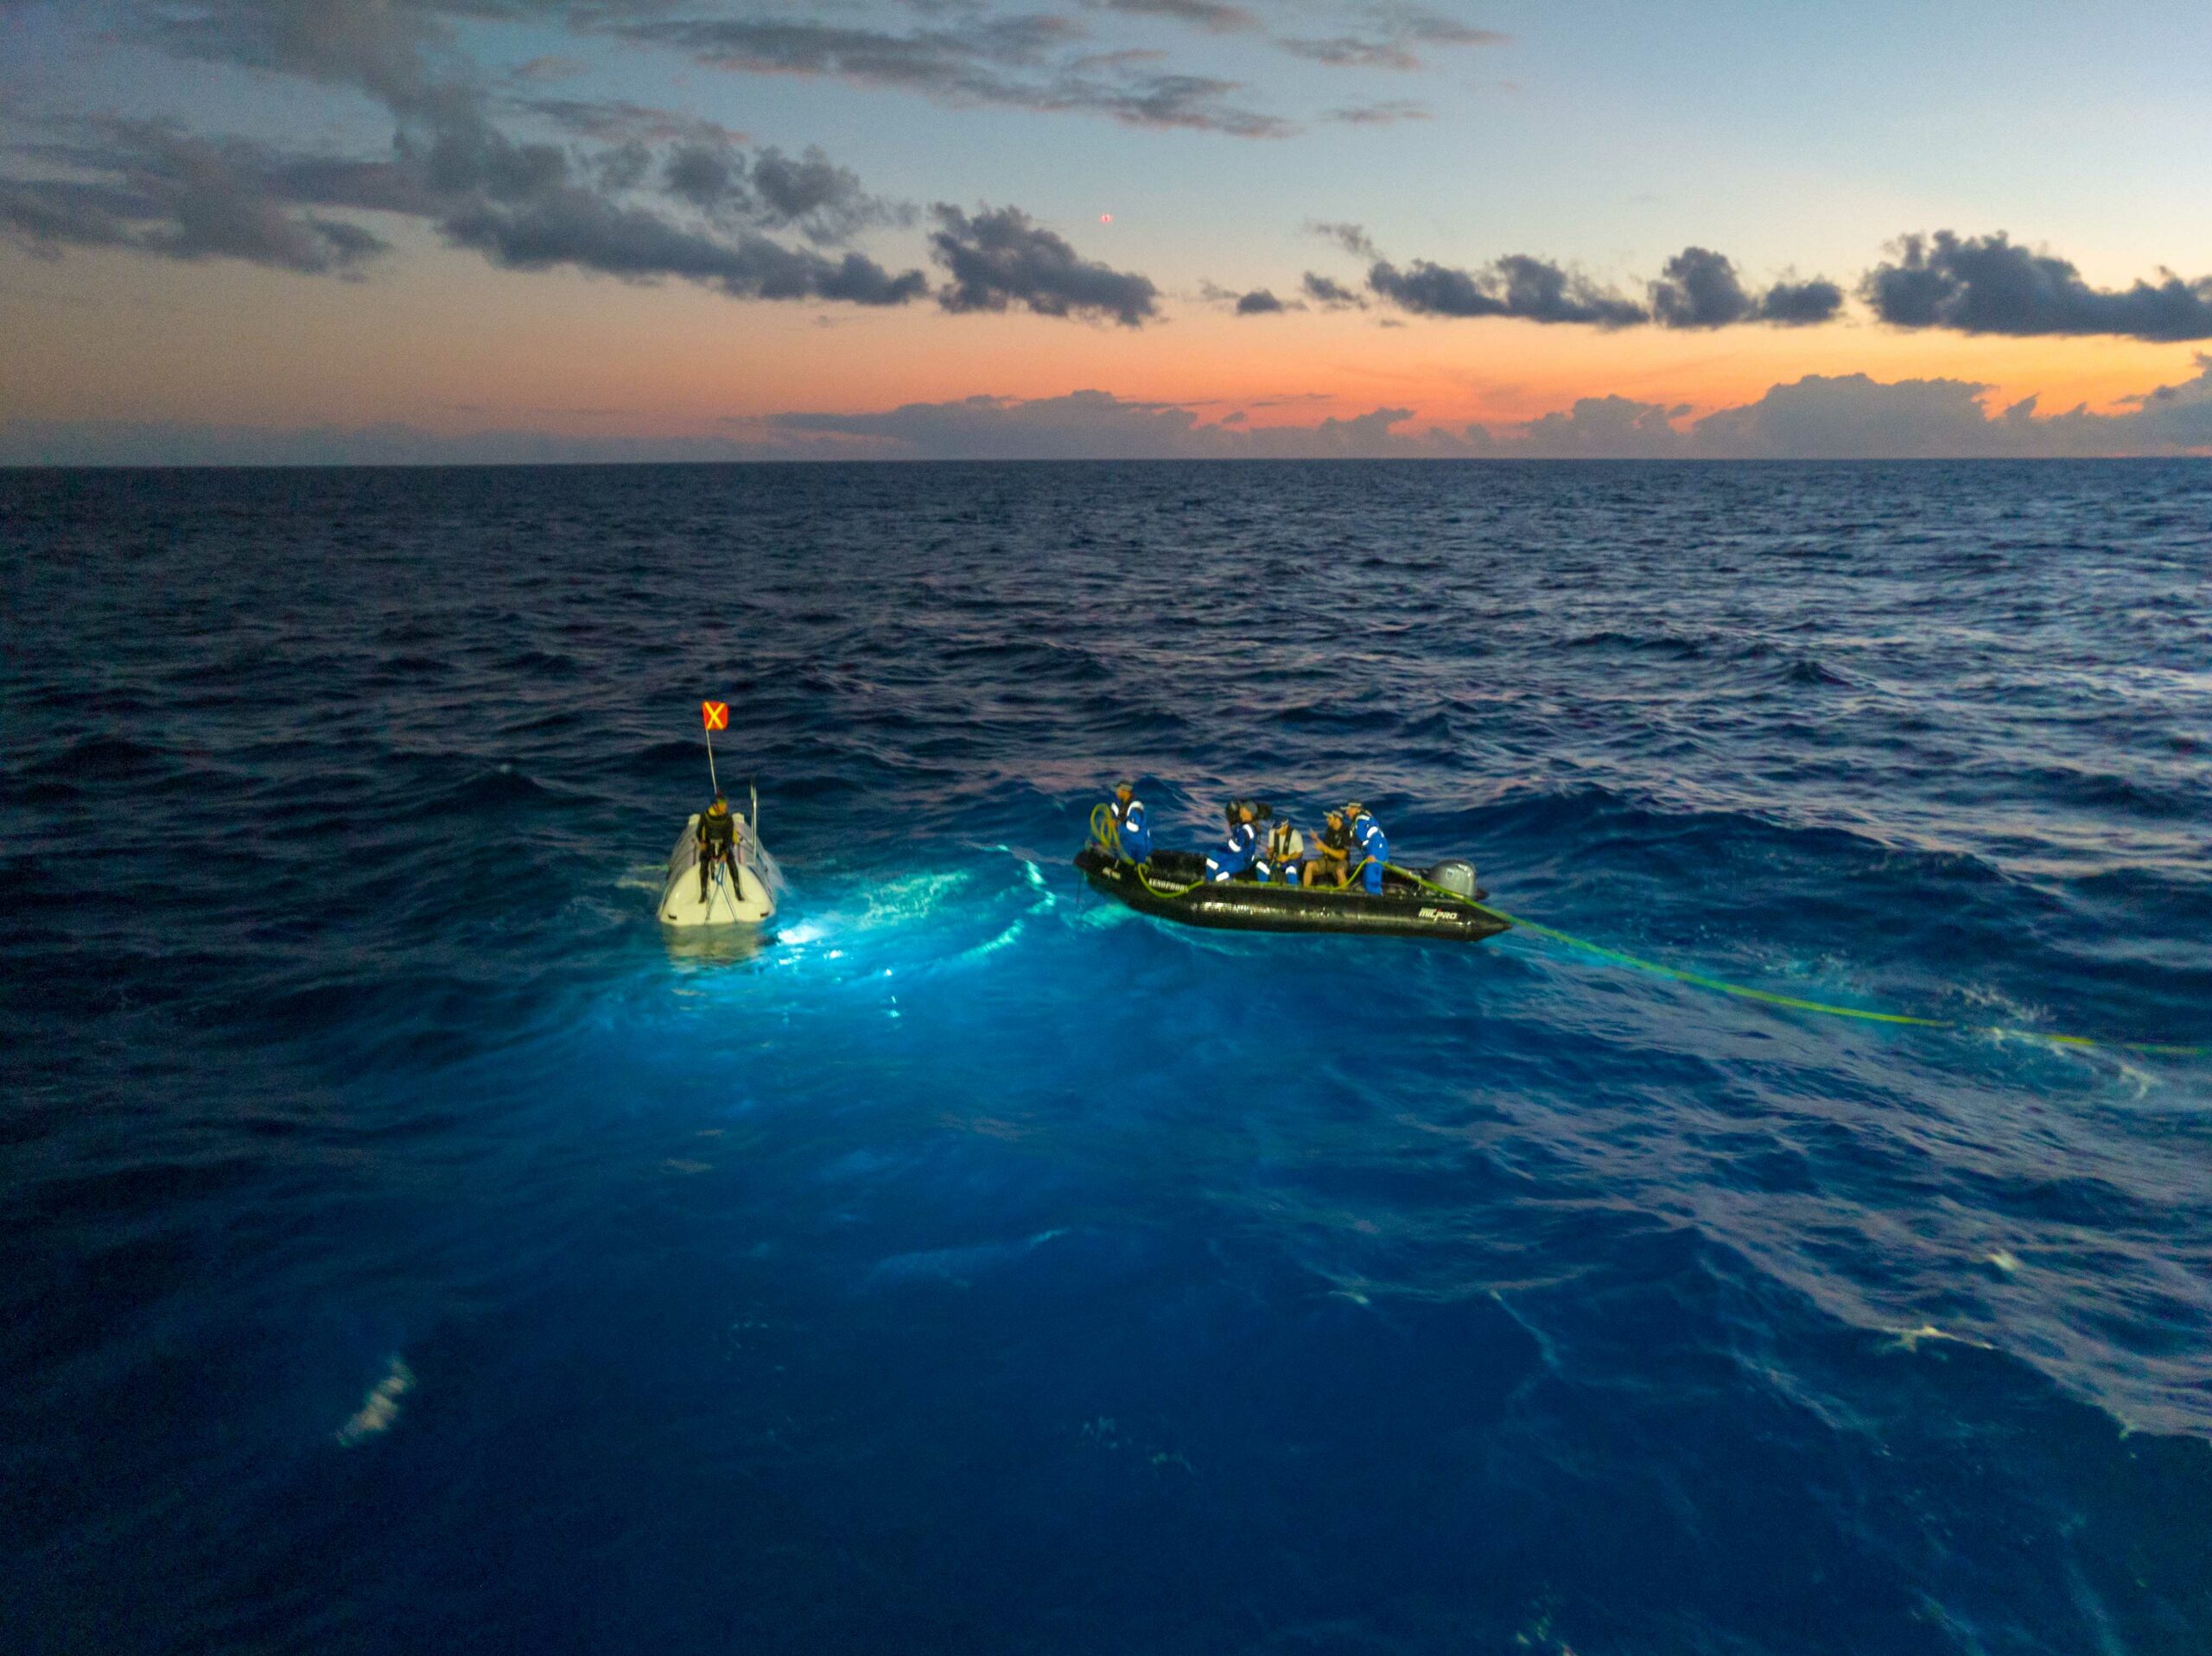 An inside look at the first solo trip to the deepest point of the Atlantic